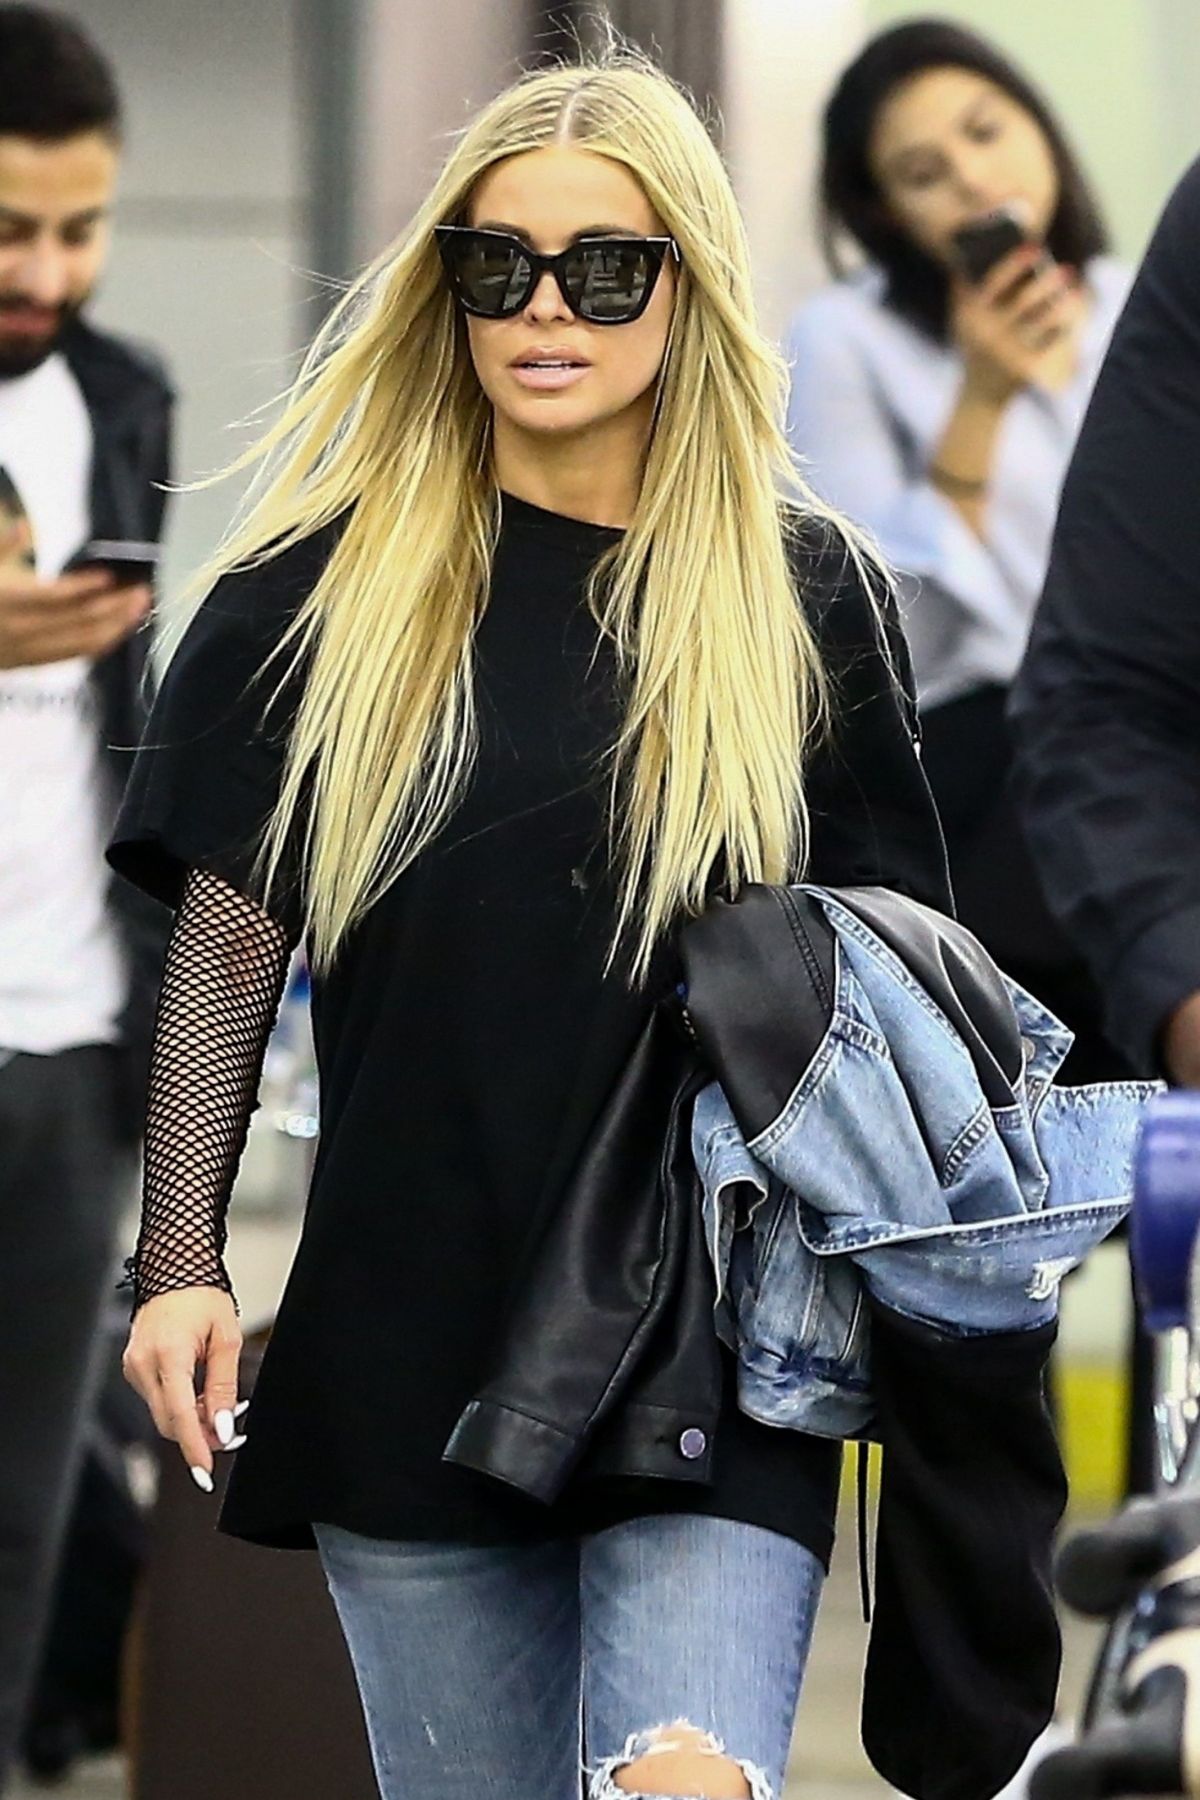 CARMEN ELECTRA Arrives at Airport in Miami 04/13/2018 – HawtCelebs